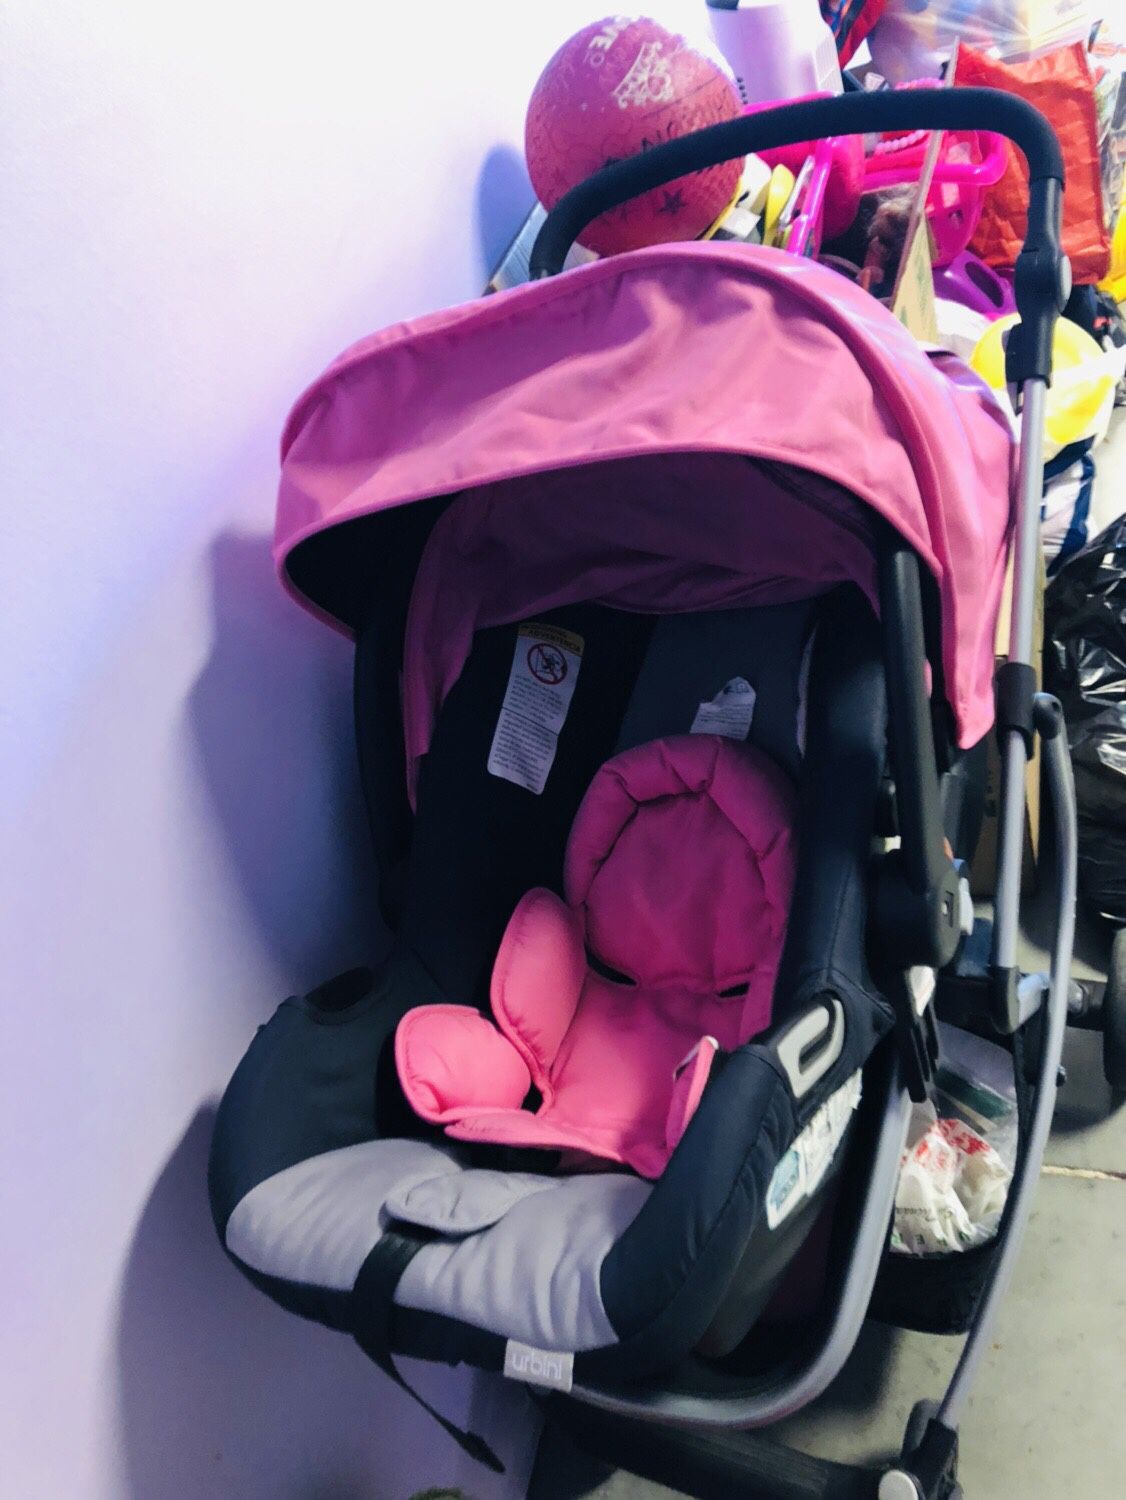 Brand new stroller and car seat